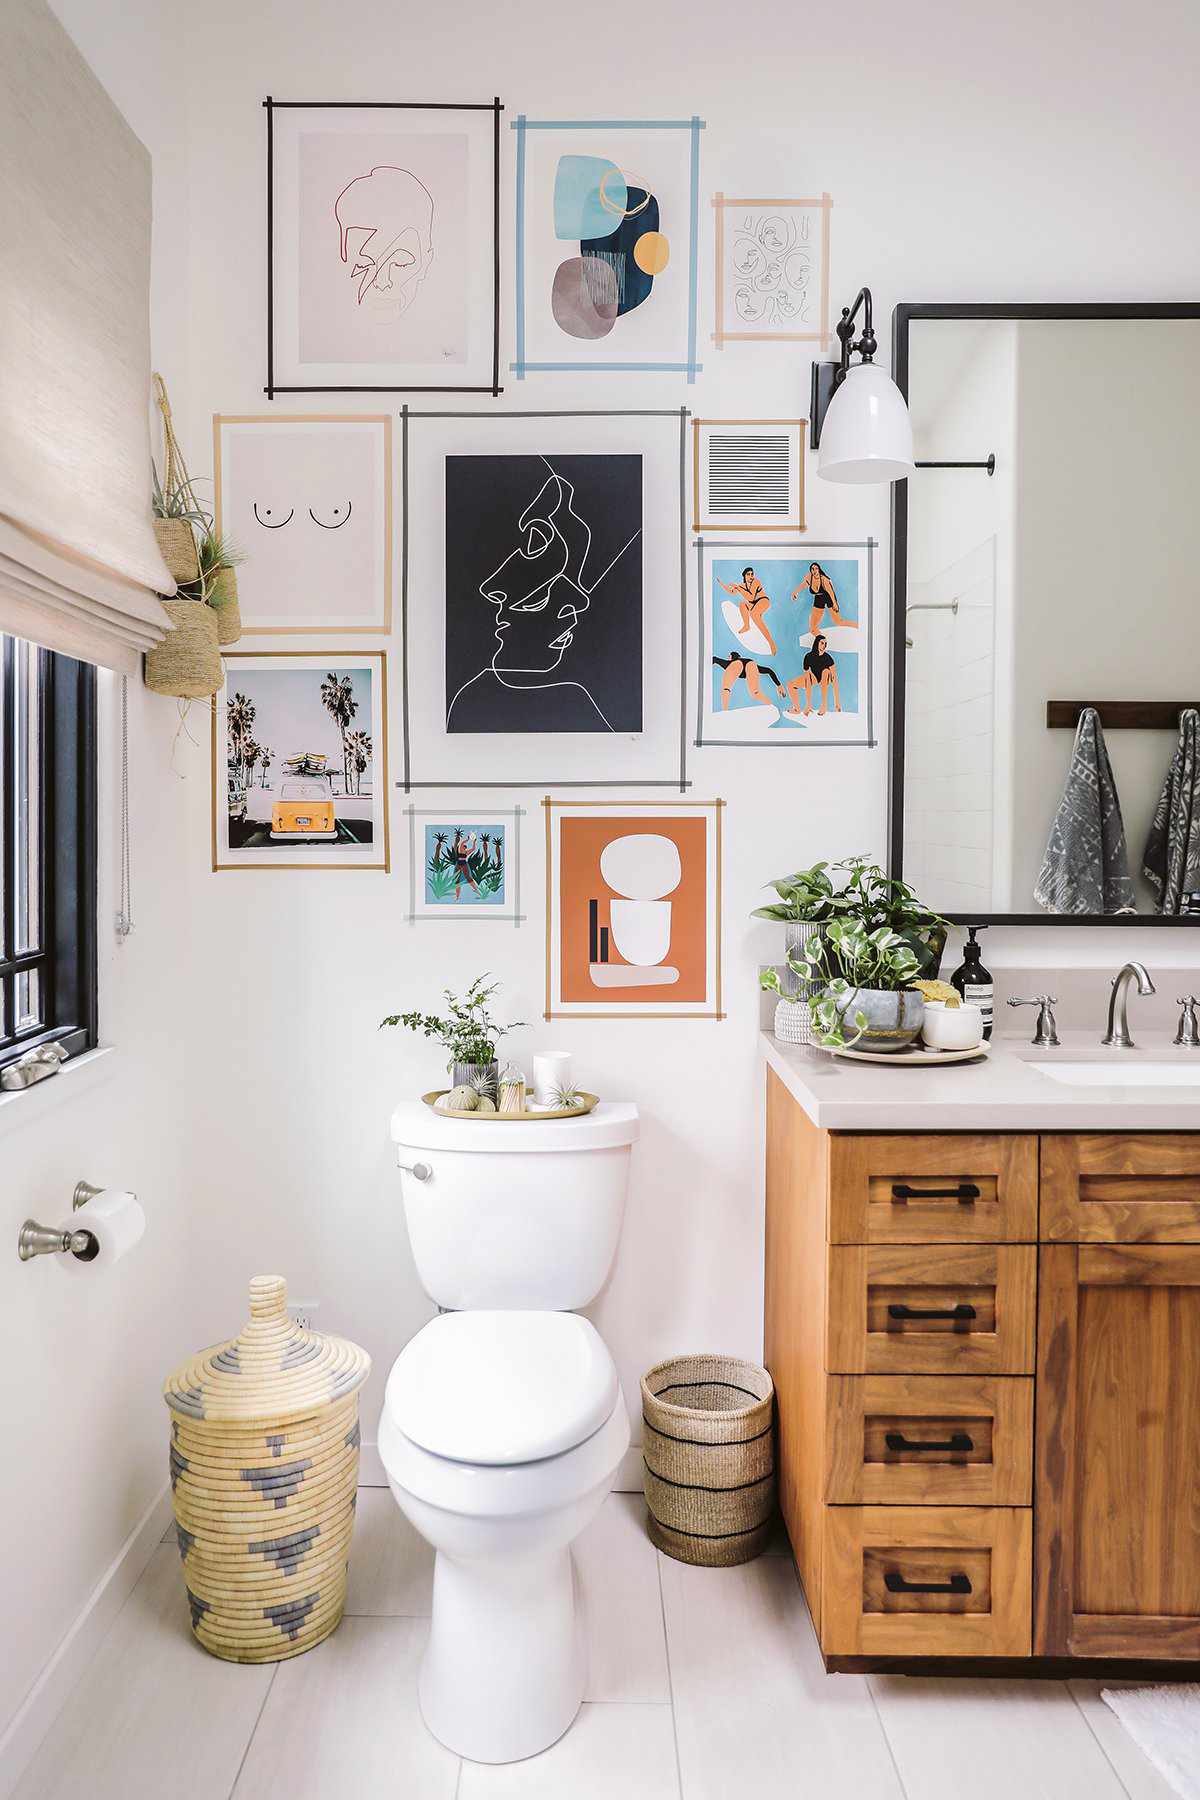 Create An Aesthetic Wall Gallery